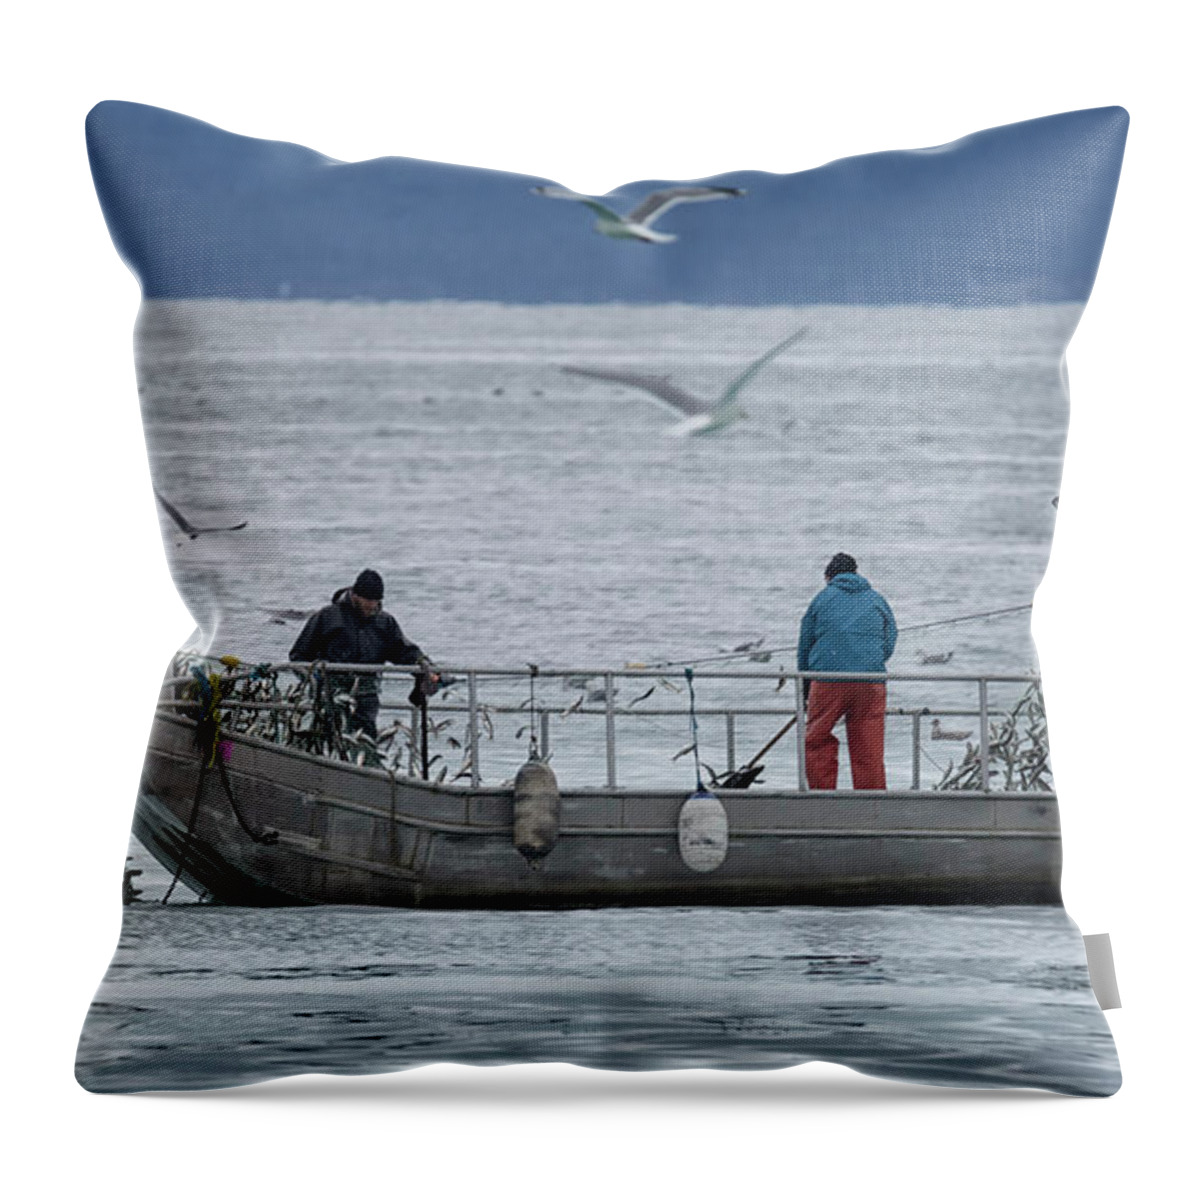 Herring Throw Pillow featuring the photograph Full Net by Randy Hall